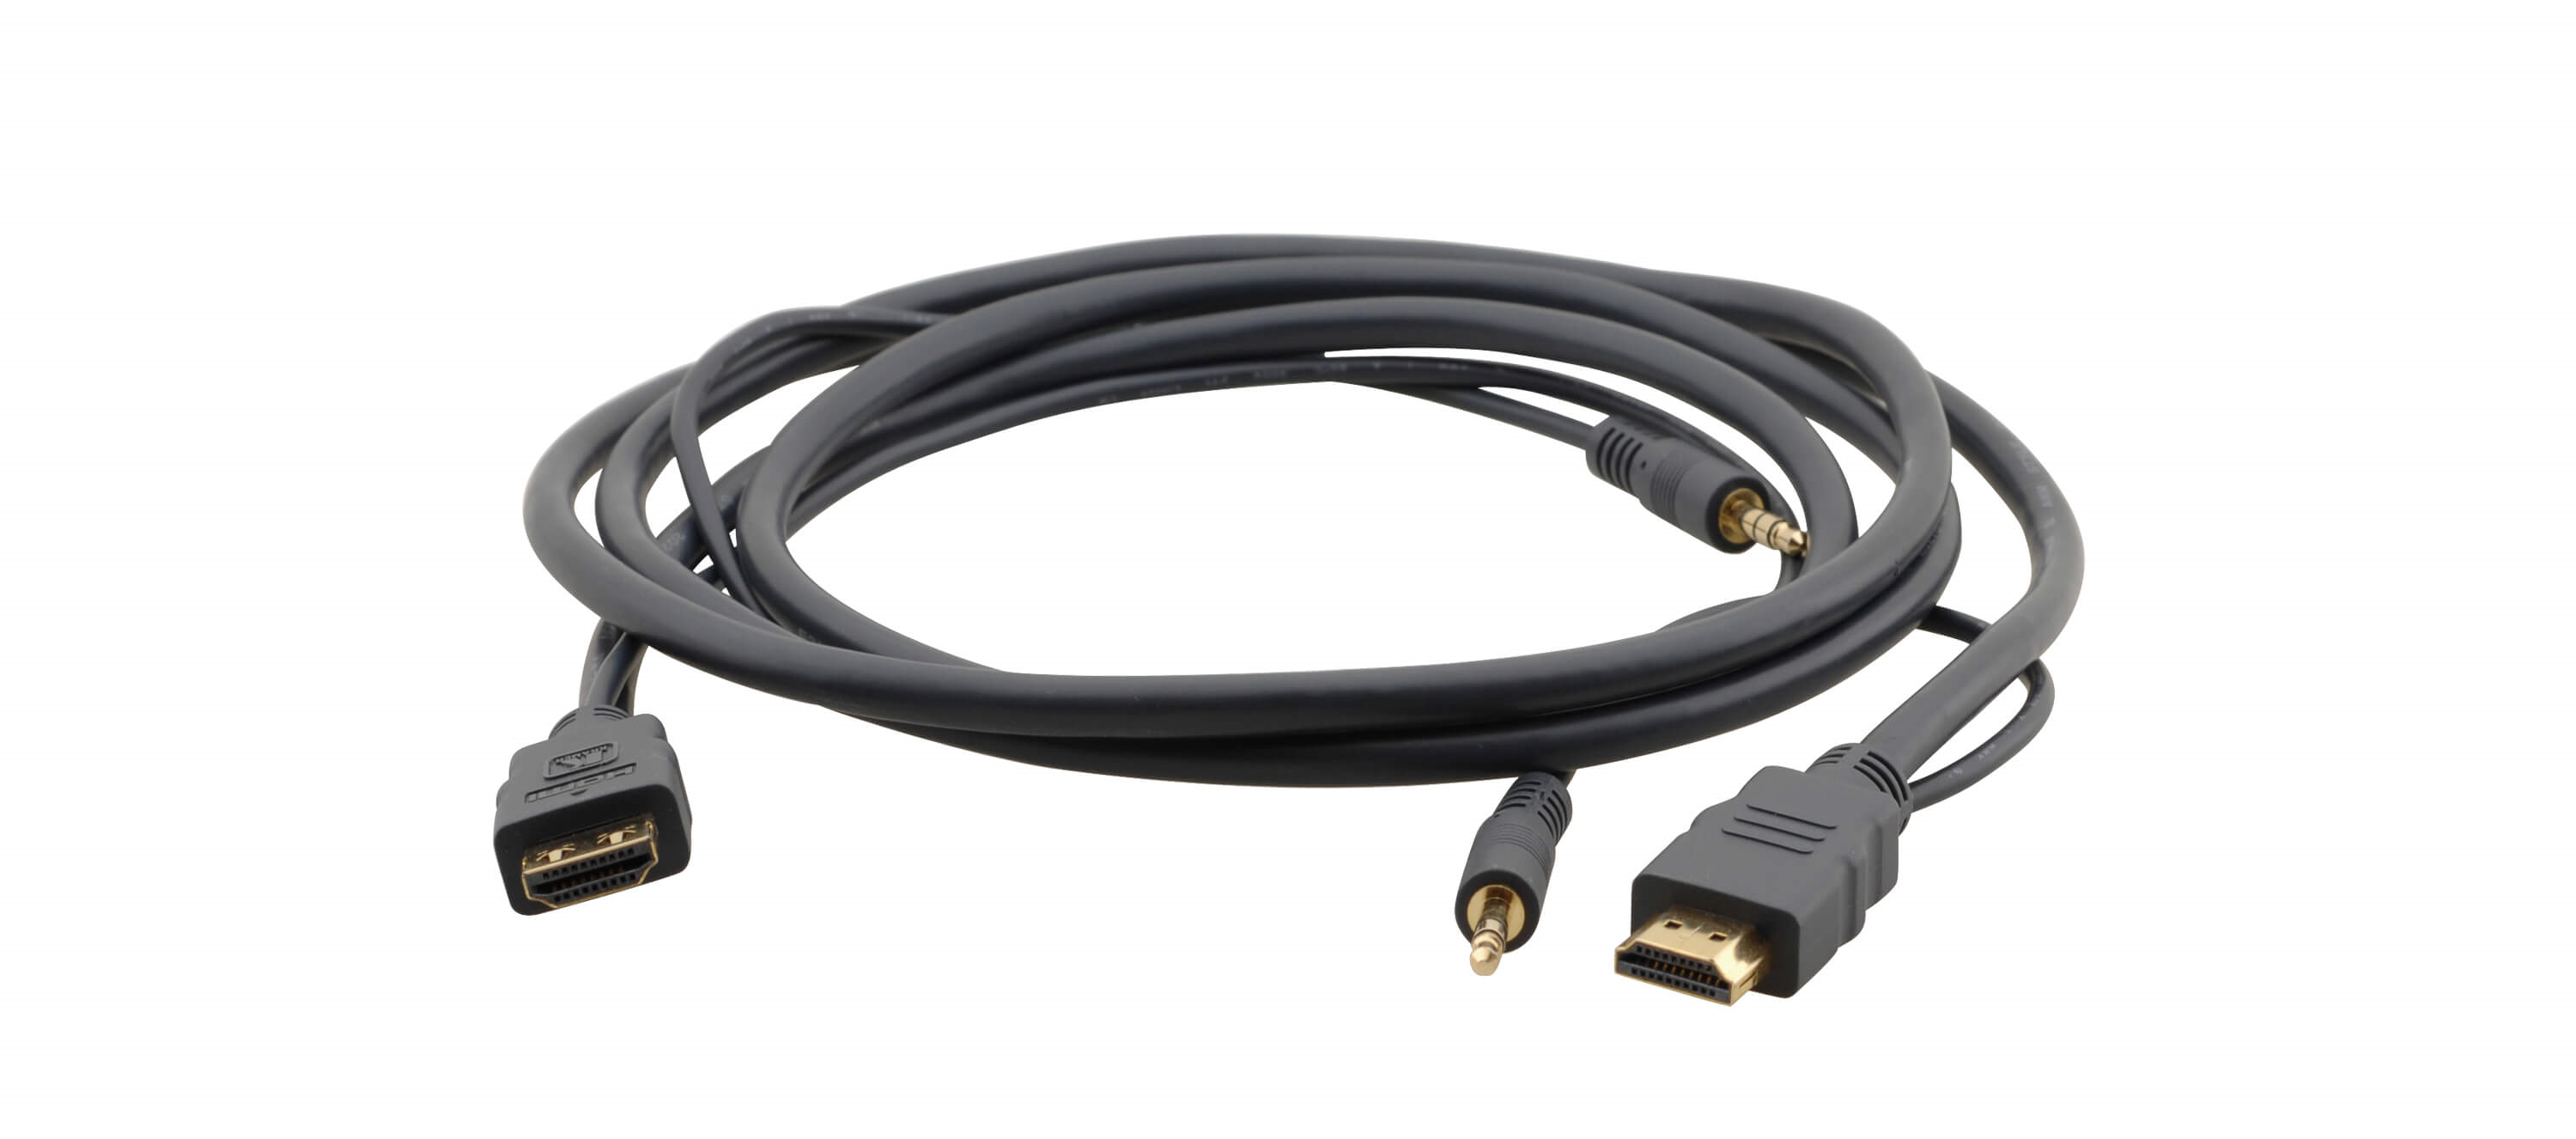 C-MHMA/MHMA-6 Flexible High–Speed HDMI Cable with Ethernet & 3.5mm Stereo Audio - 6'